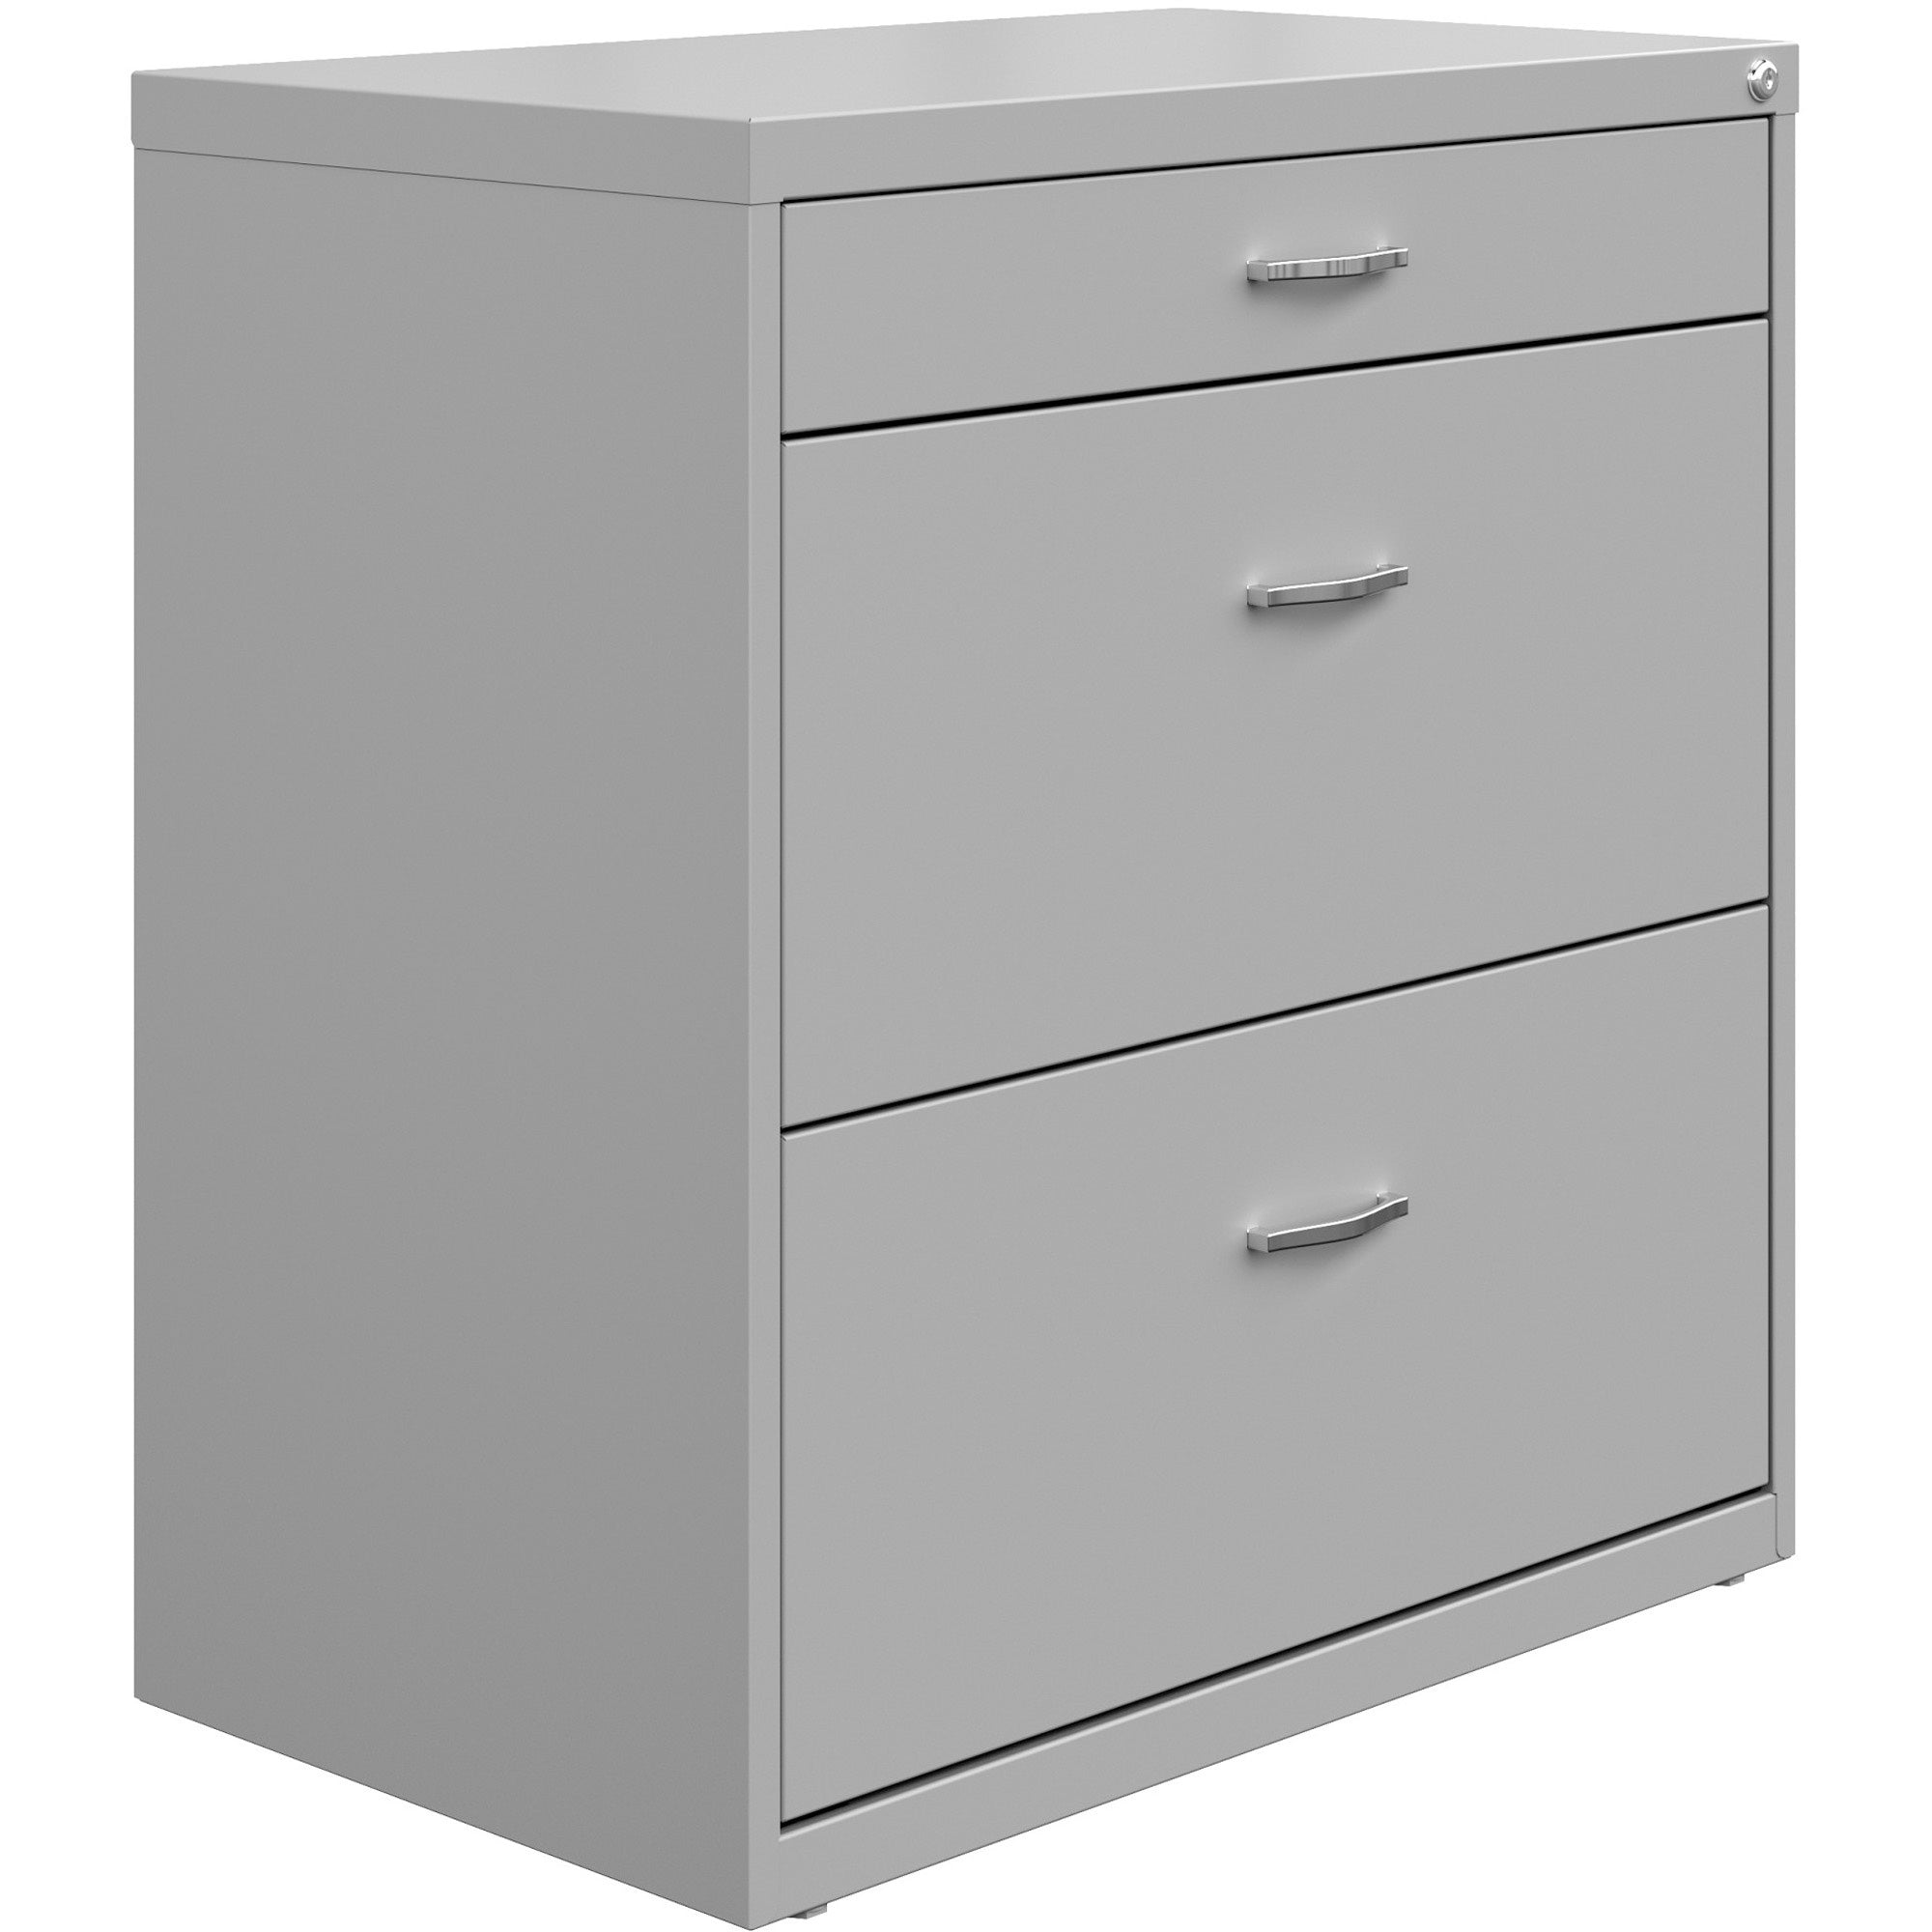 nusparc-pencil-drawer-lateral-file-30-x-176-x-317-2-x-drawers-for-file-pencil-letter-lateral-interlocking-anti-tip-ball-bearing-slide-ball-bearing-suspension-removable-lock-durable-nonporous-surface-adjustable-leveler-silve_nprlf318bbsr - 1